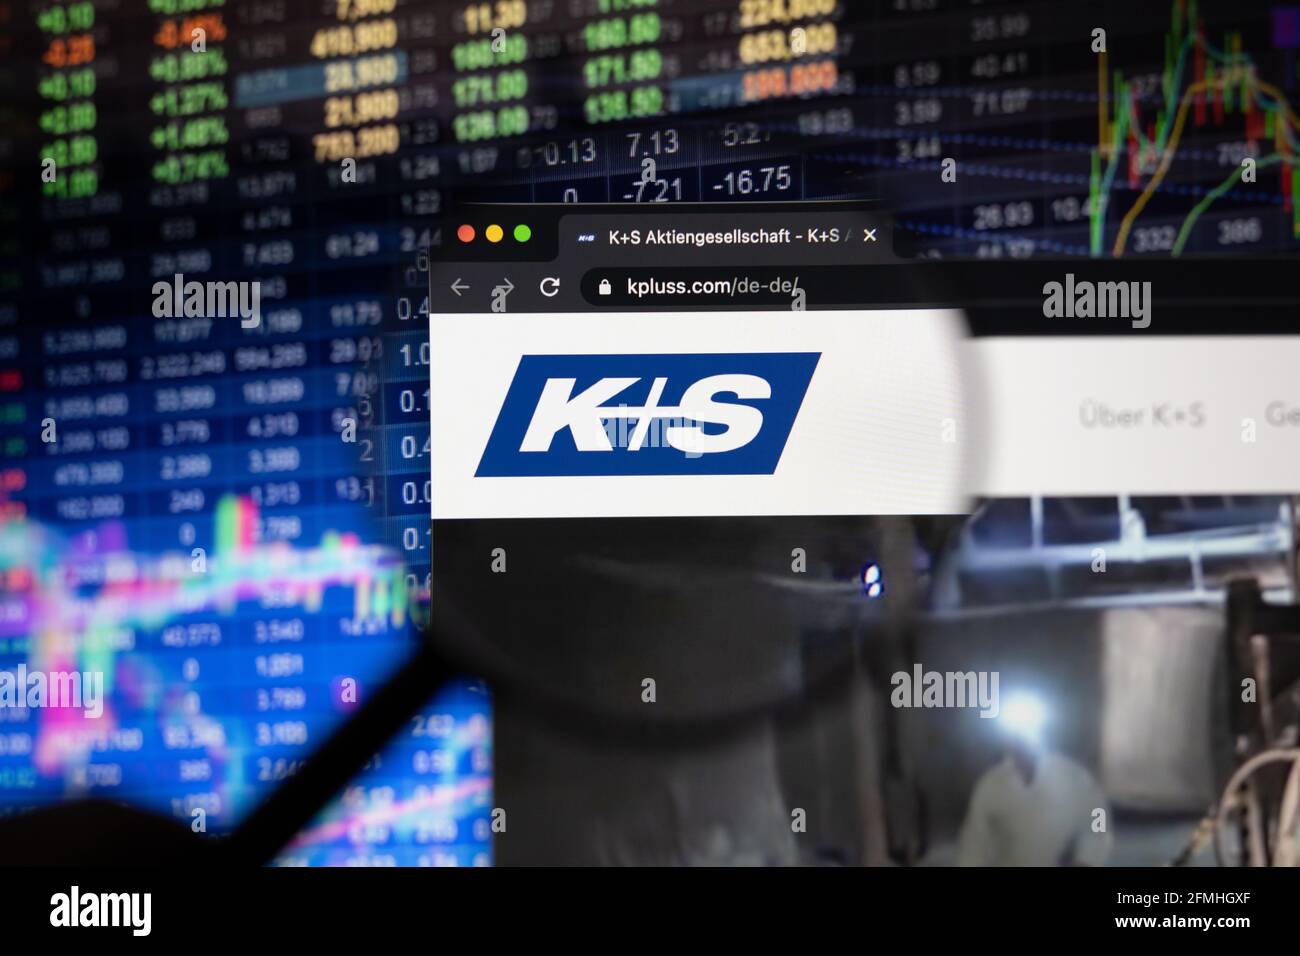 K+S company logo on a website with blurry stock market developments in the background, seen on a computer screen through a magnifying glass Stock Photo